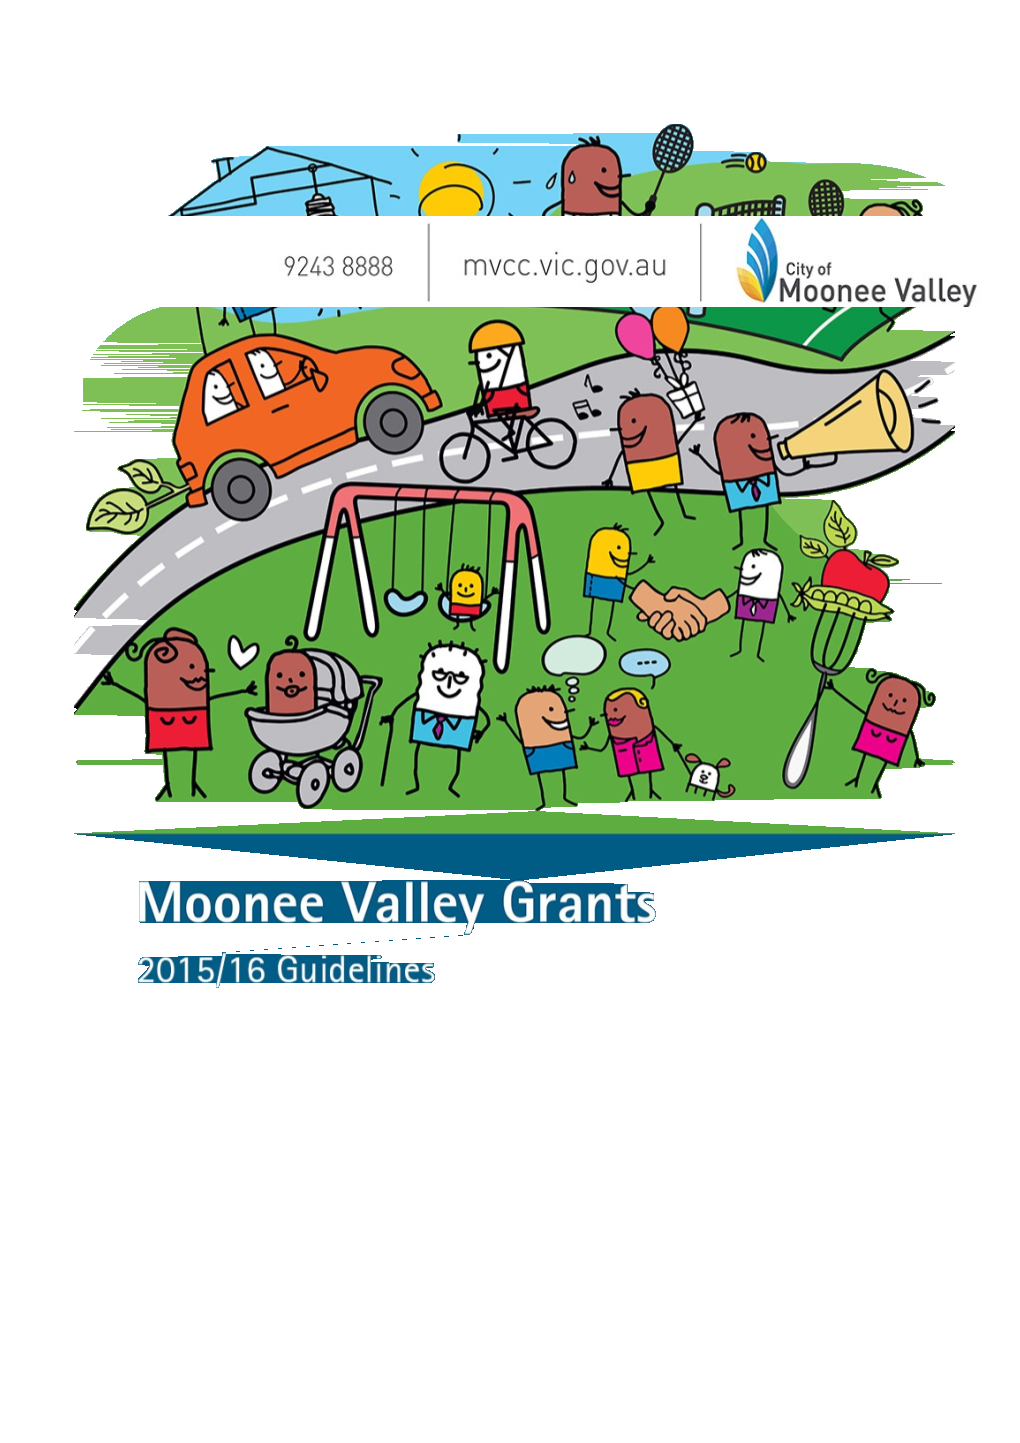 What Is the Purpose of the Moonee Valley Grants Program?